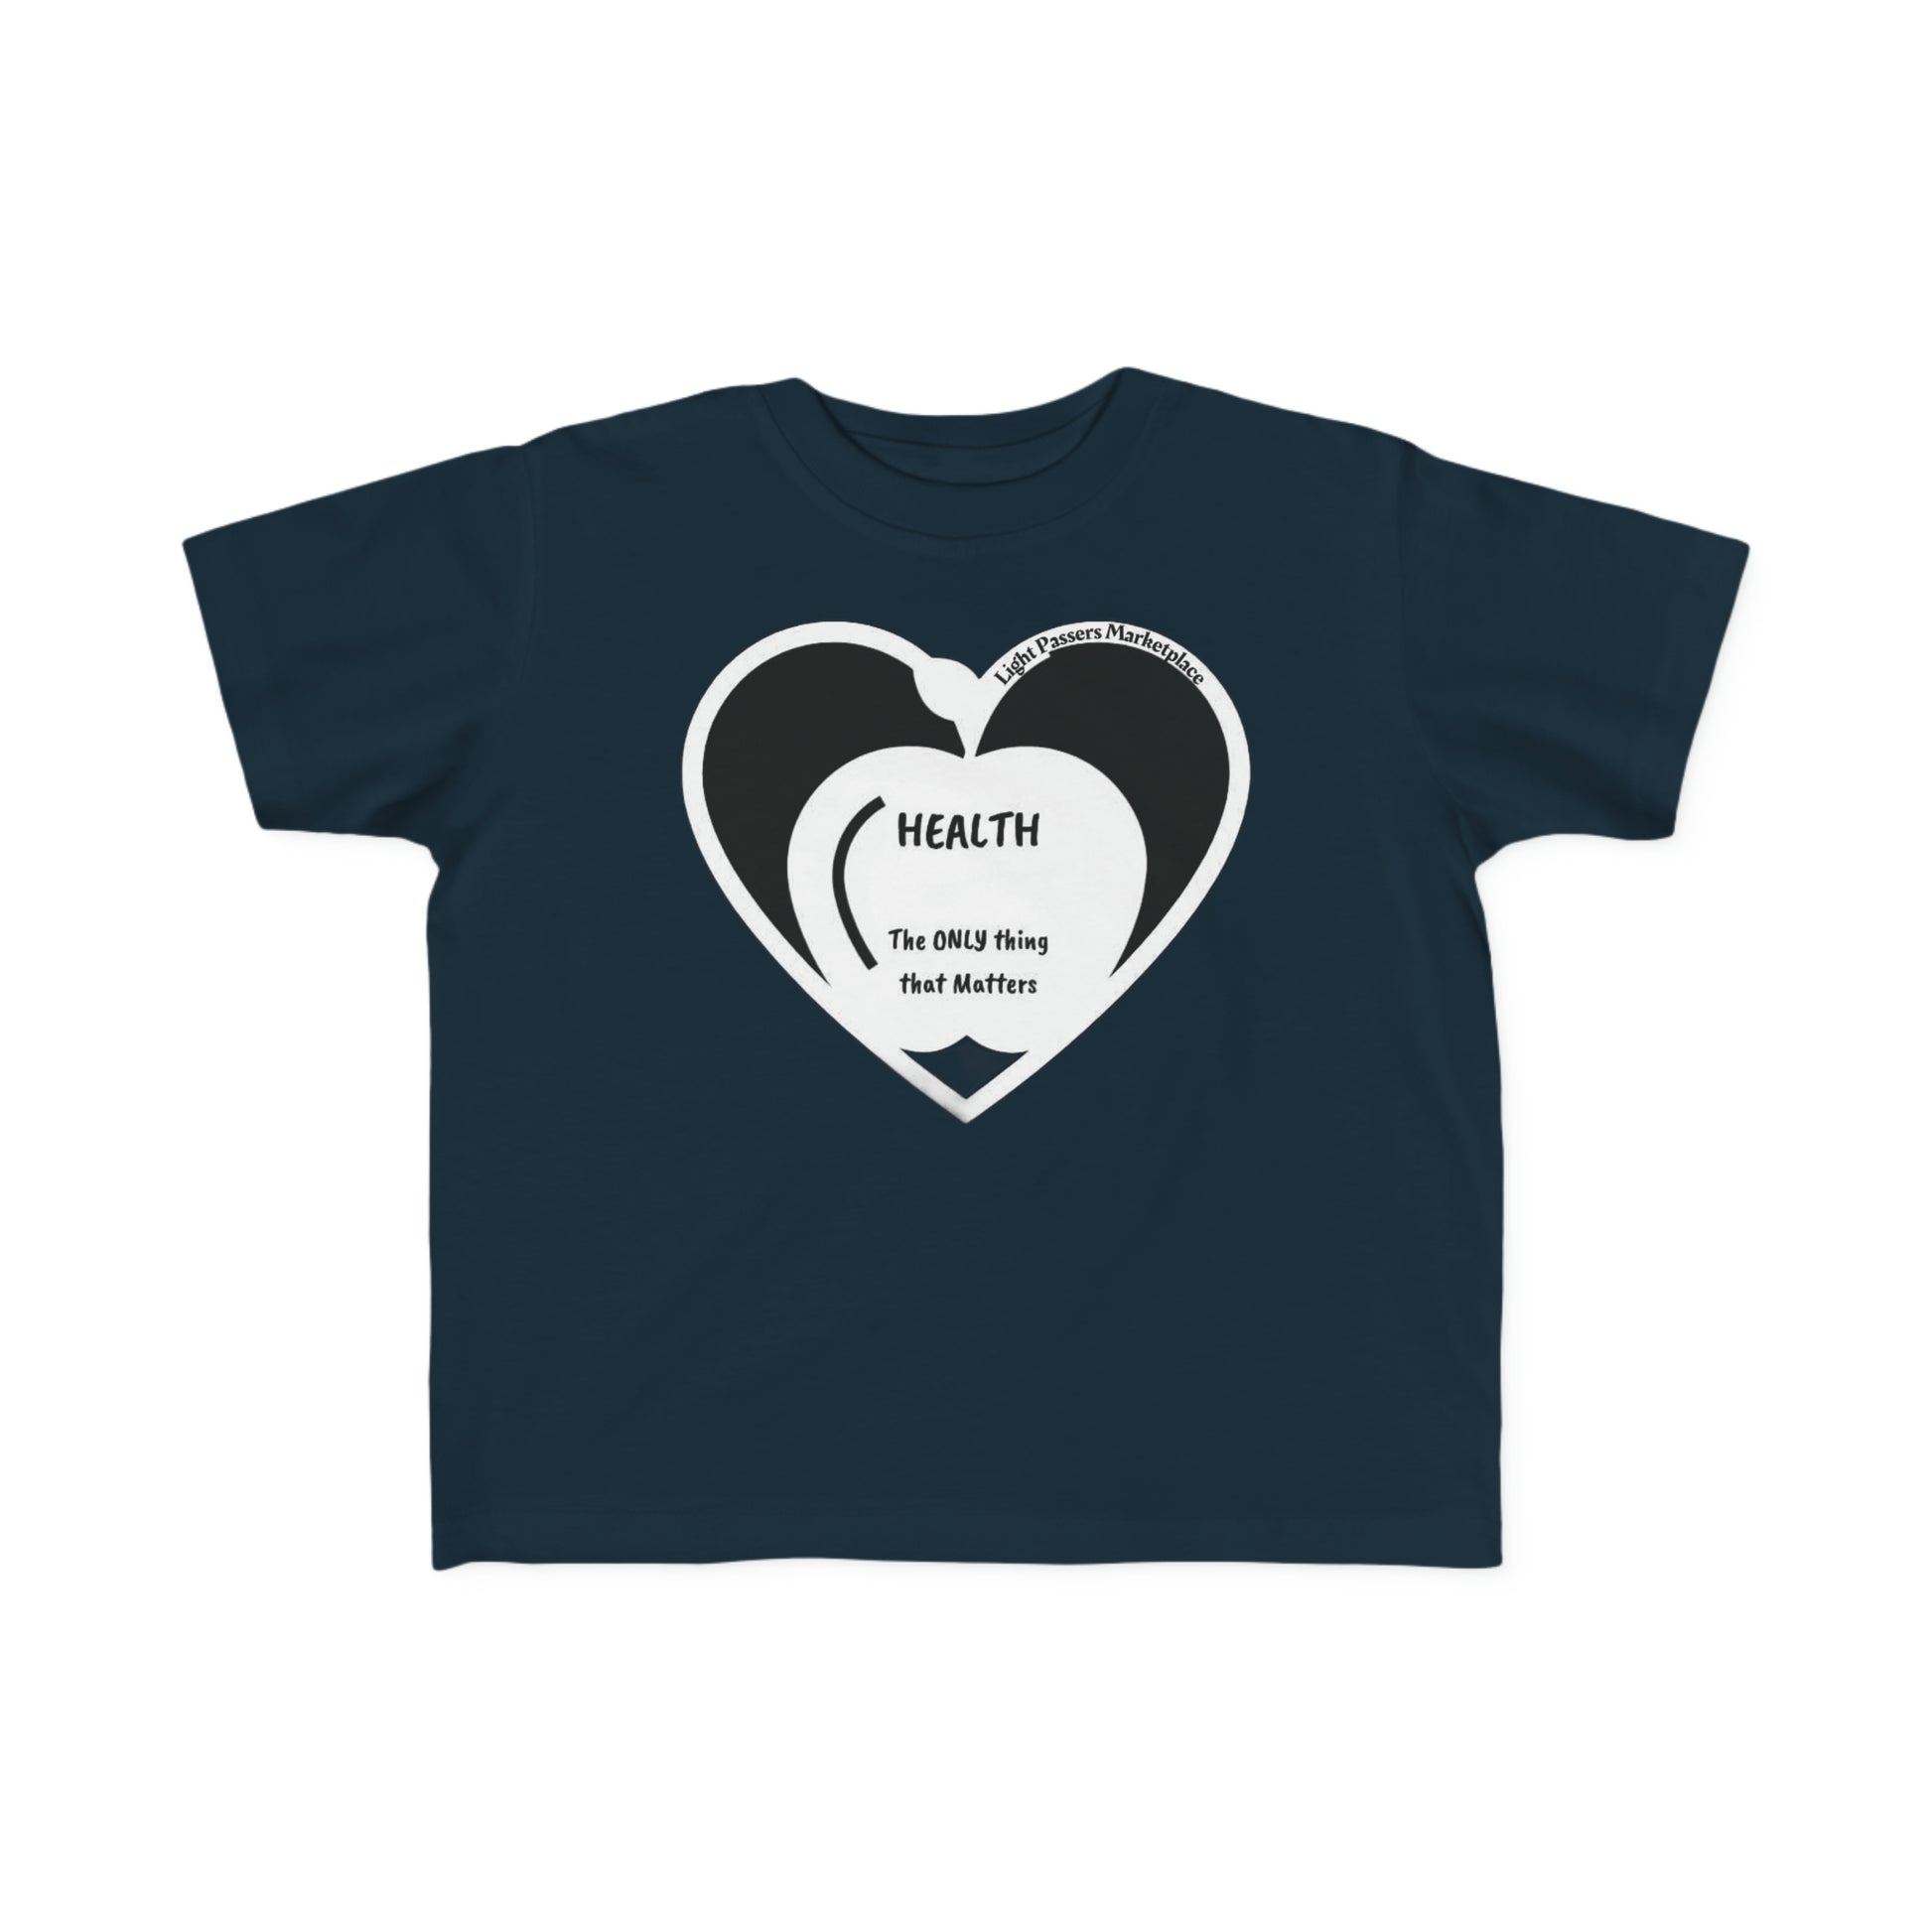 A toddler's tee with a heart design, ideal for sensitive skin. Made of 100% combed cotton, light fabric, durable print, and tear-away label. Apple Health Toddler T-shirts offer comfort for little ones.